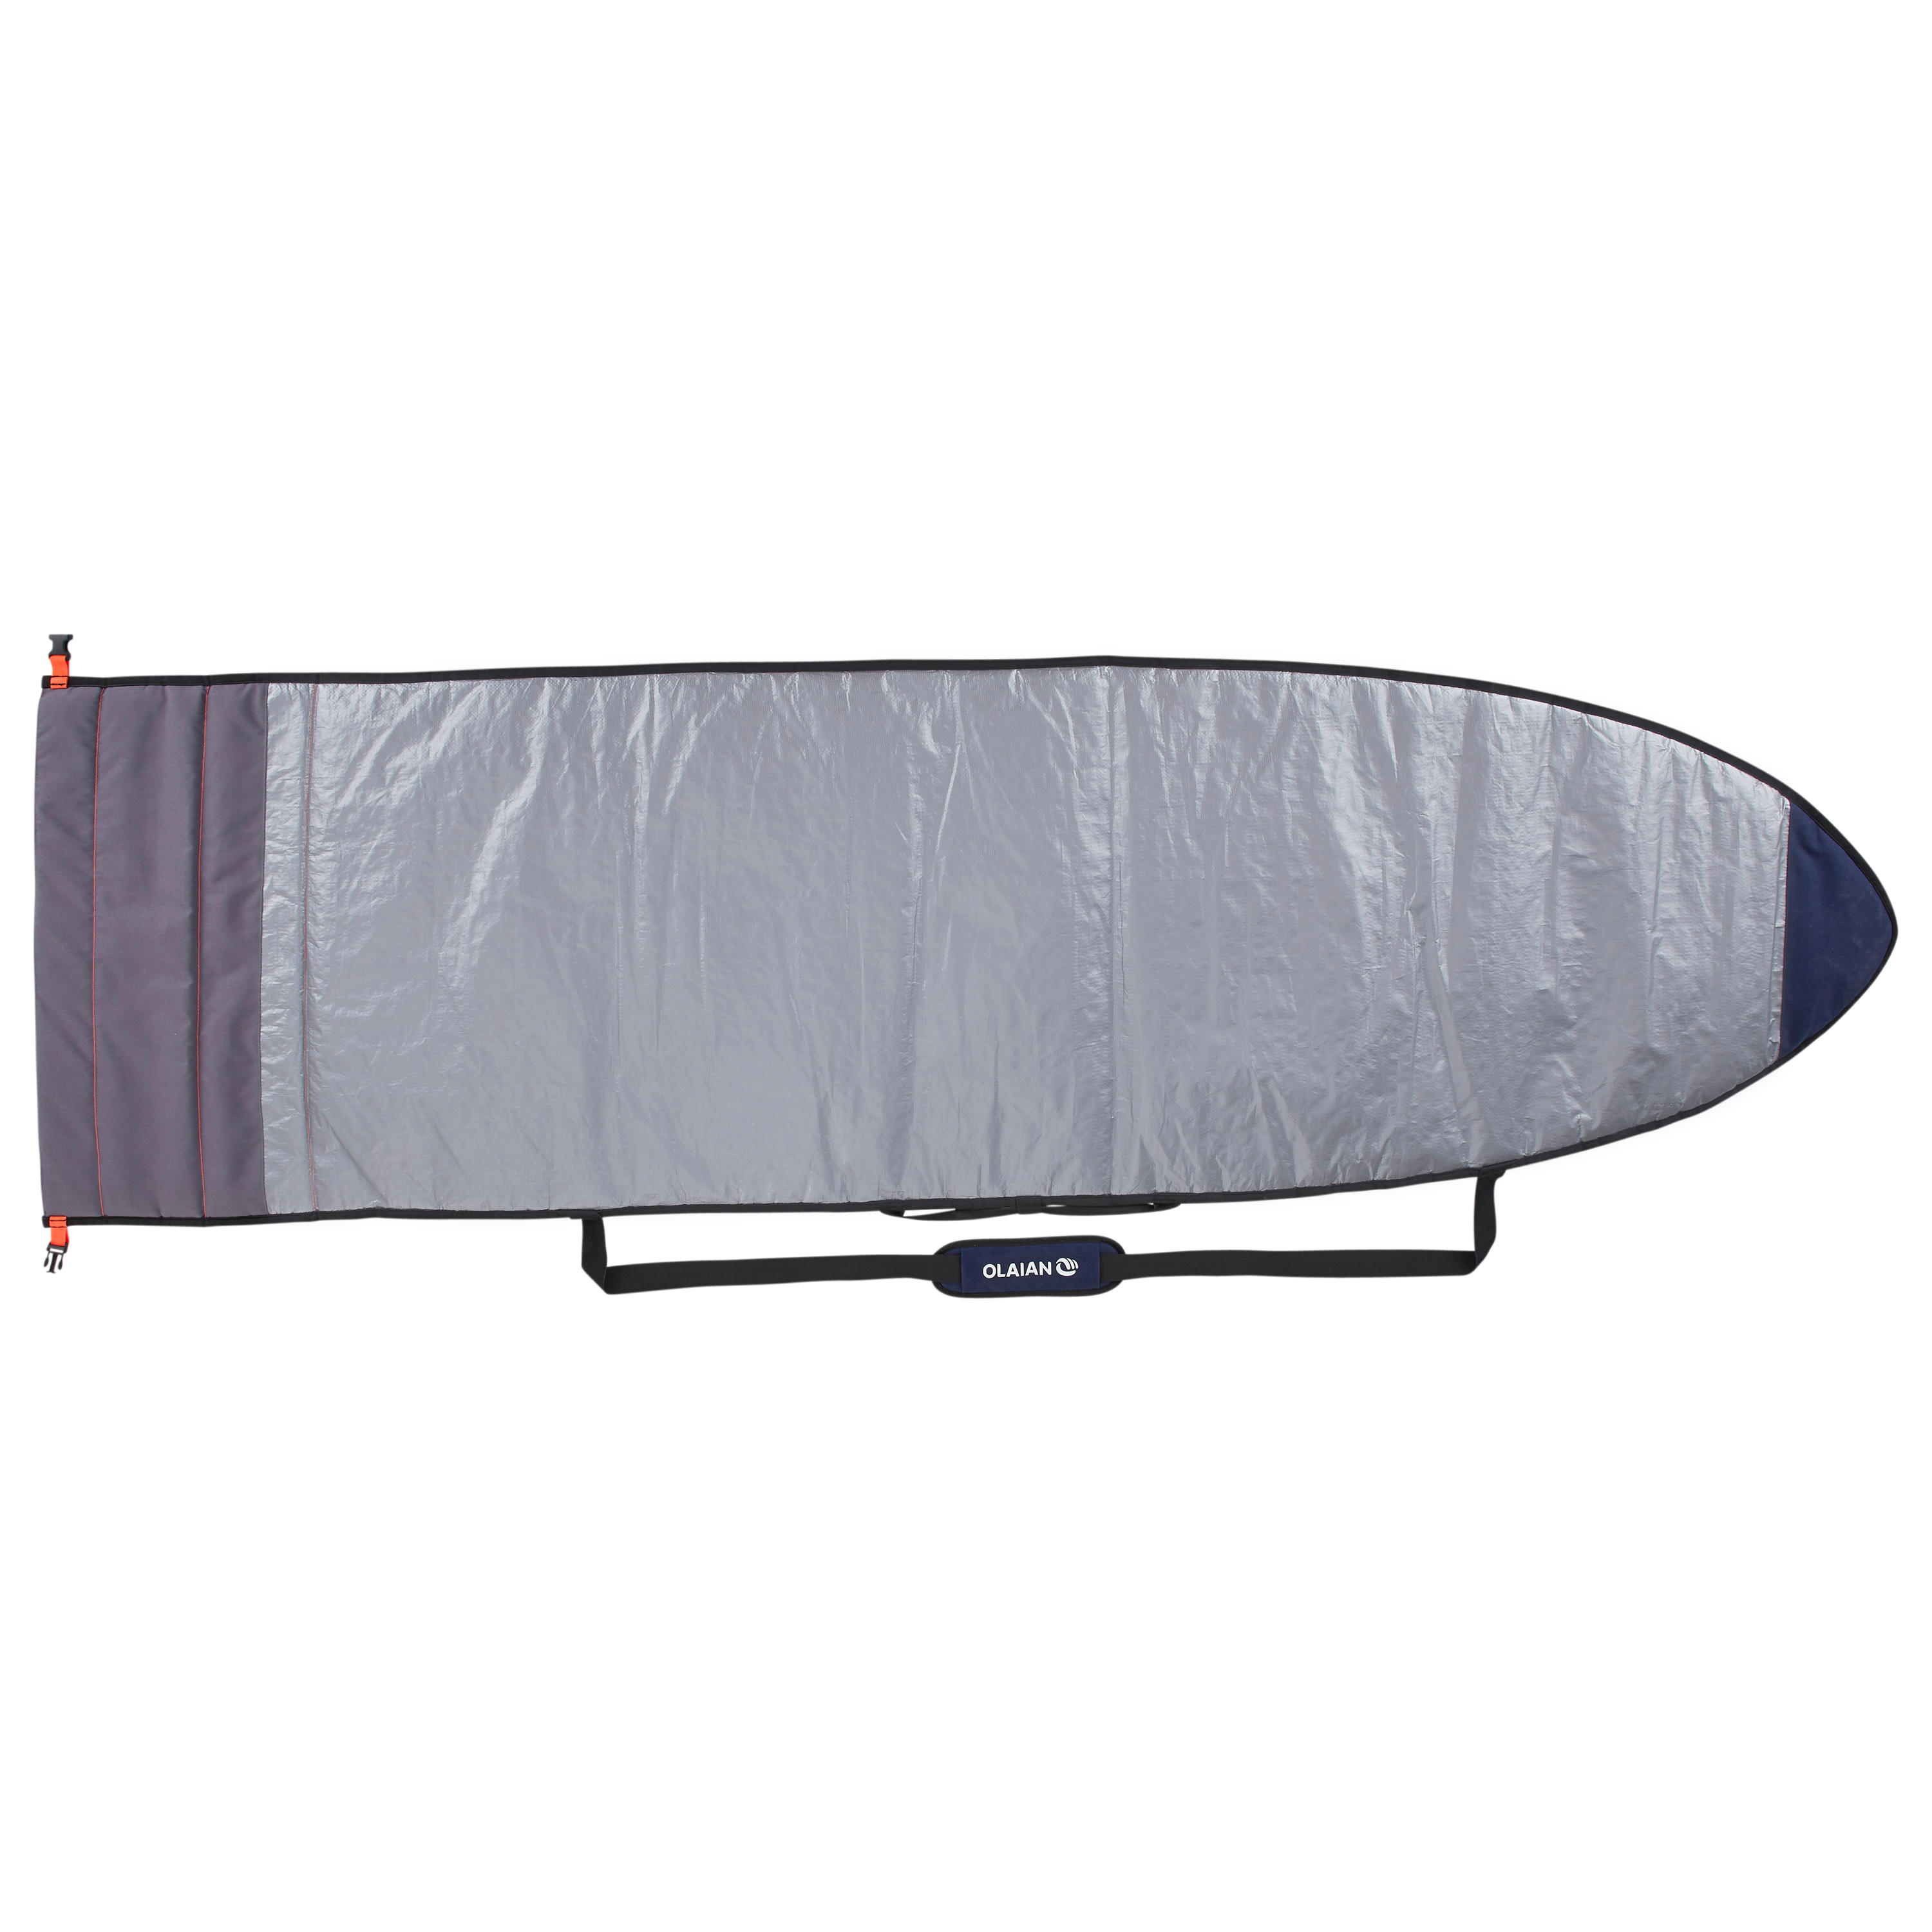 ADJUSTABLE COVER for boards 5'4" to 7'2" (162 cm to 218 cm) 2/8